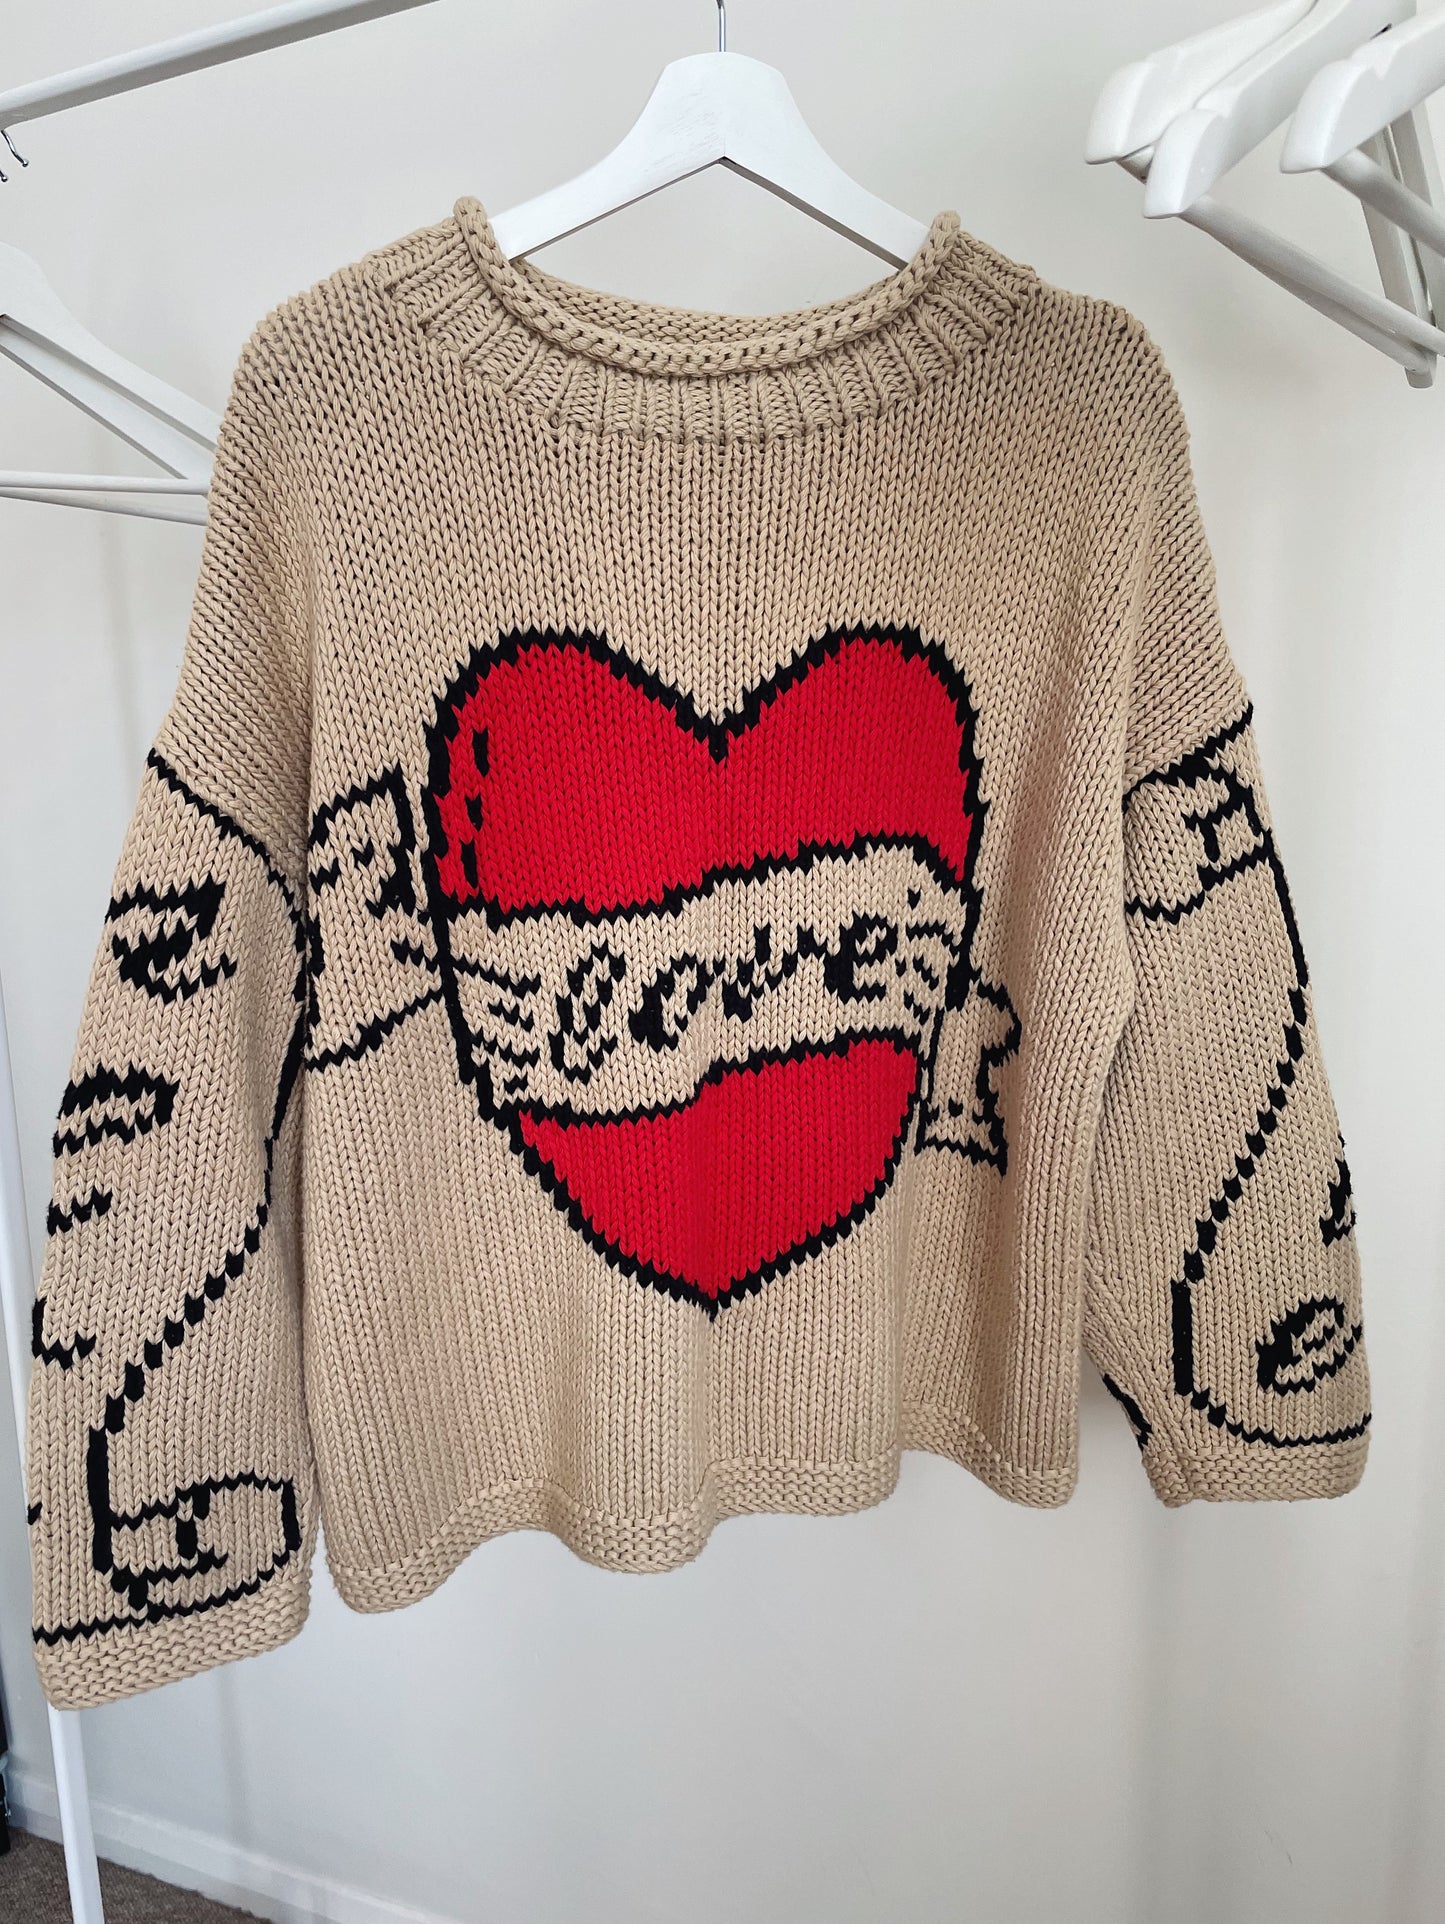 The Young Hearts Jumper